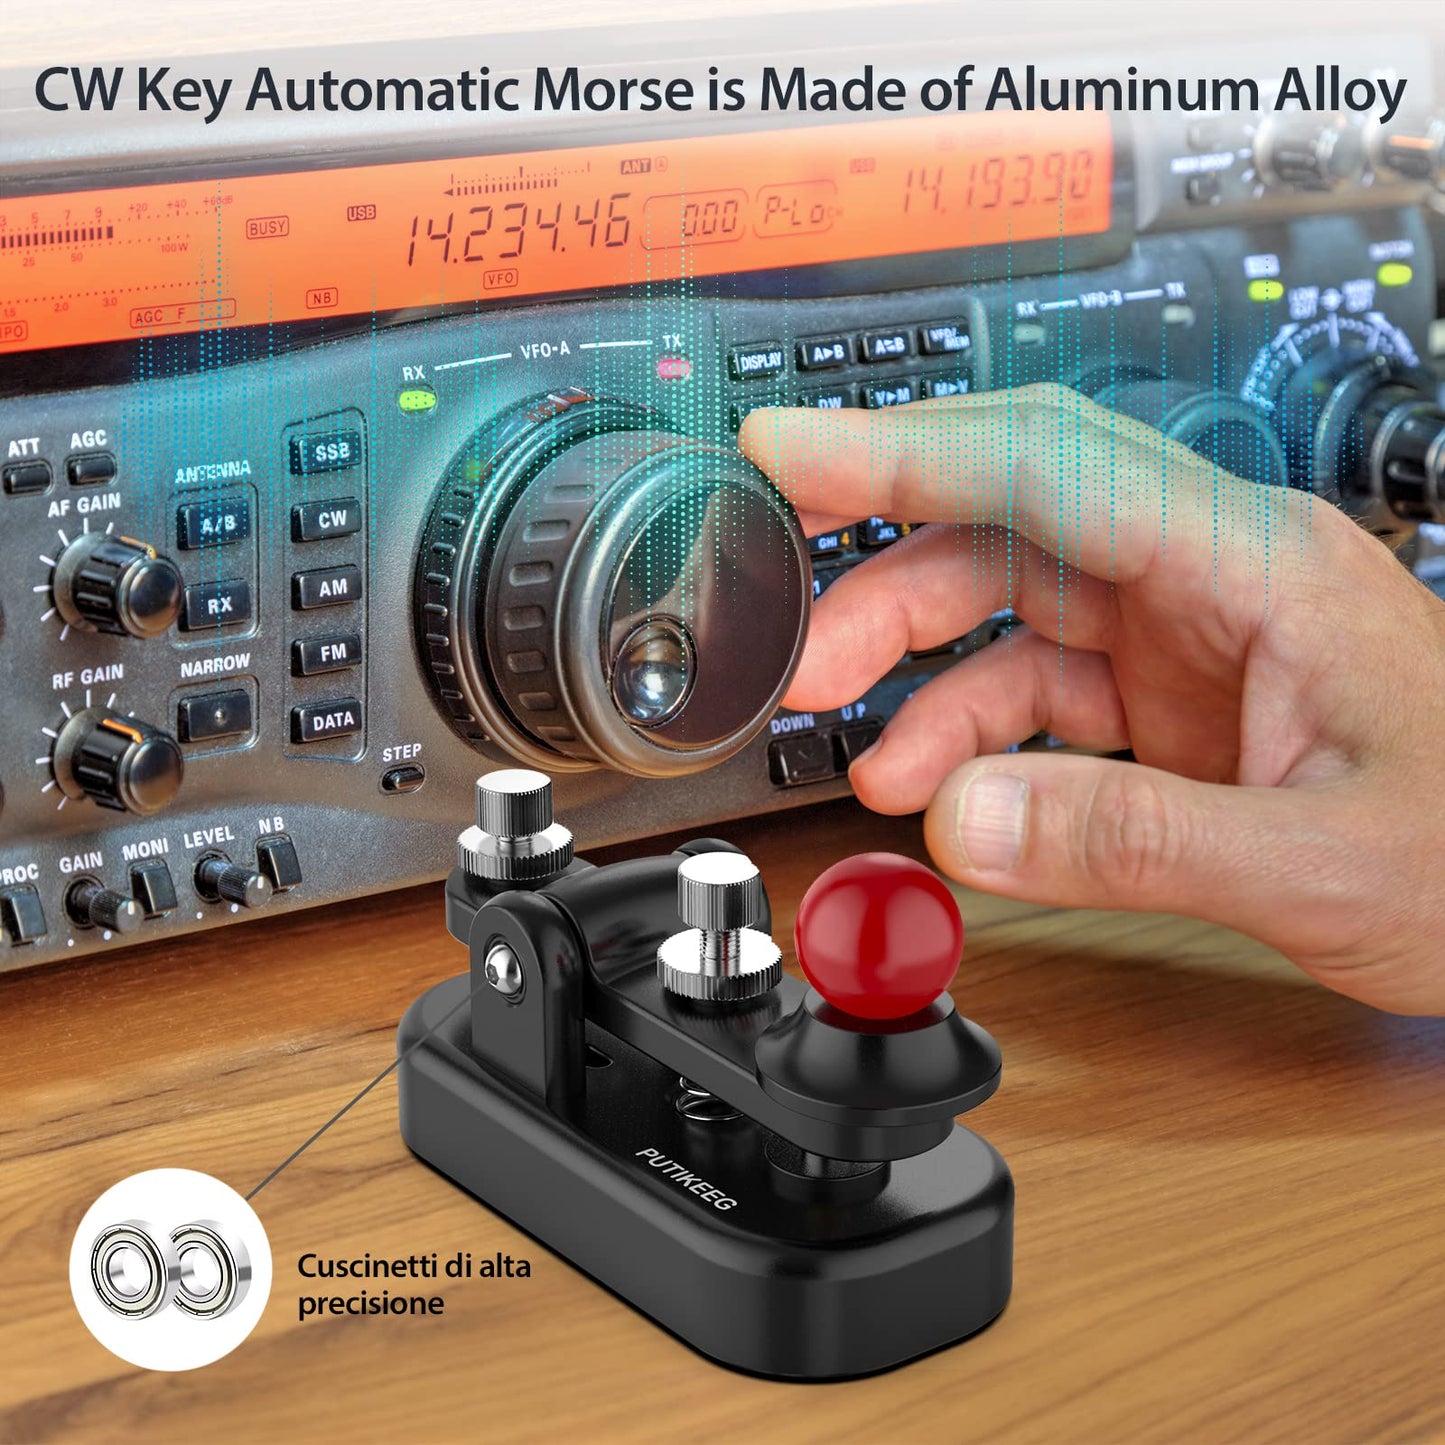 The CW Morse Straight Key Mini offers precise and comfortable Morse code operation. This Straight Key Morse features tool-free paddle adjustment, a powerful magnetic return, and stable silicone foot pads. Made from durable 6061T6 aluminum alloy with NMB Japan bearings and 304 stainless steel screws, it is lightweight and portable, perfect for any radio device.